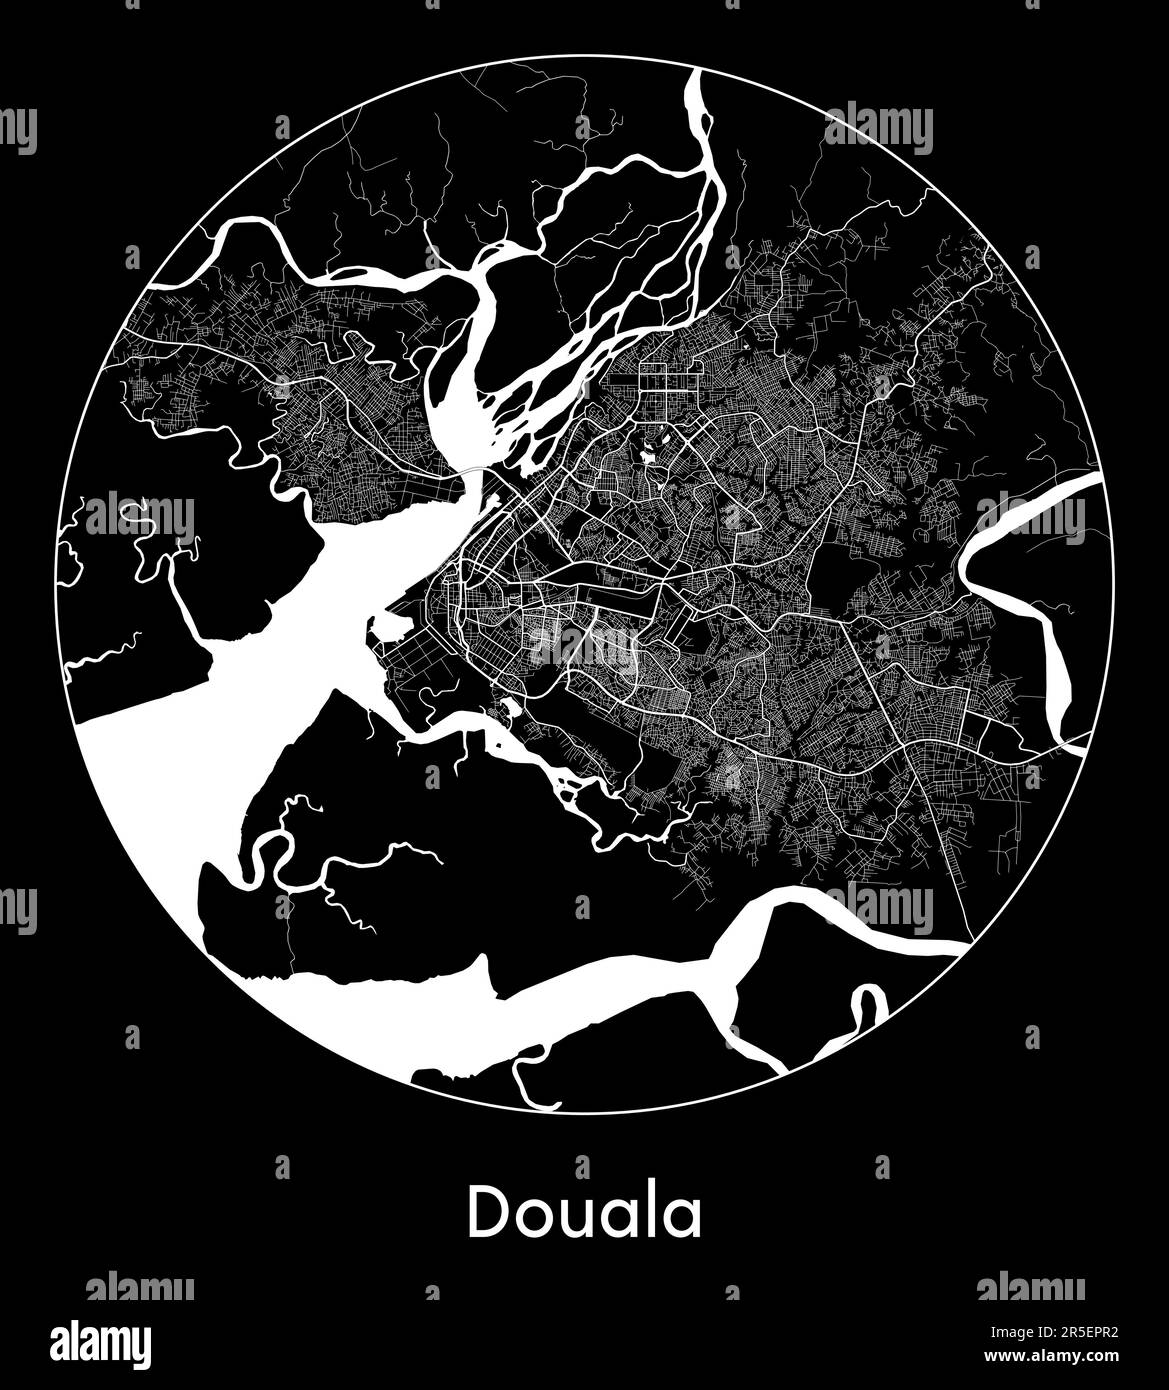 City Map Douala Cameroon Africa vector illustration Stock Vector